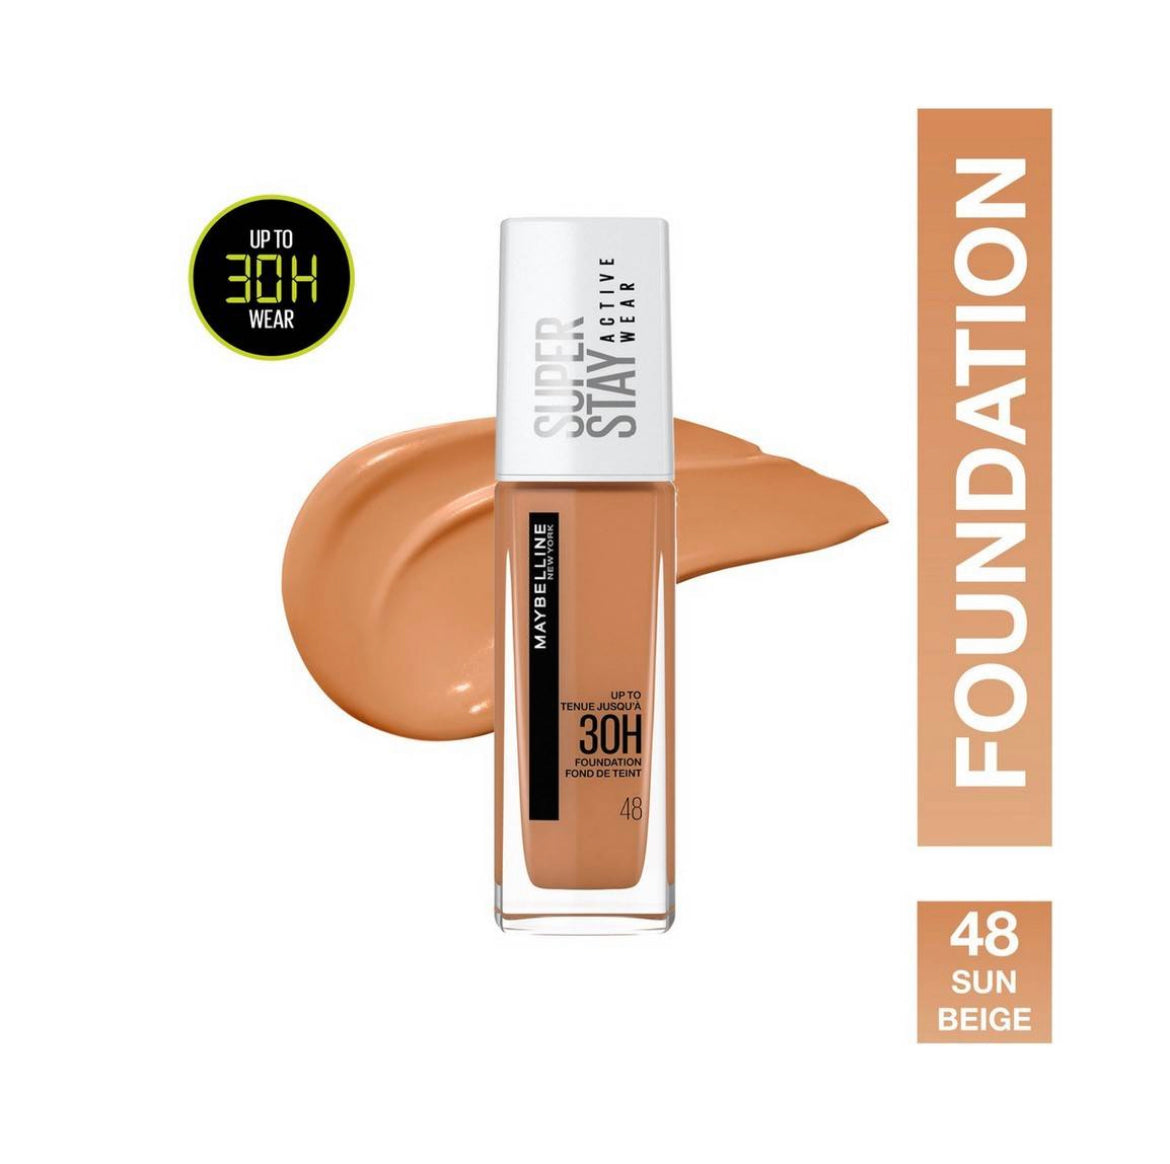 Maybelline Super Stay Full Coverage Liquid Foundation Active Wear Makeup,  Up To 30Hr Wear, Transfer, Sweat & Water Resistant, Matte Finish, Sun  Beige